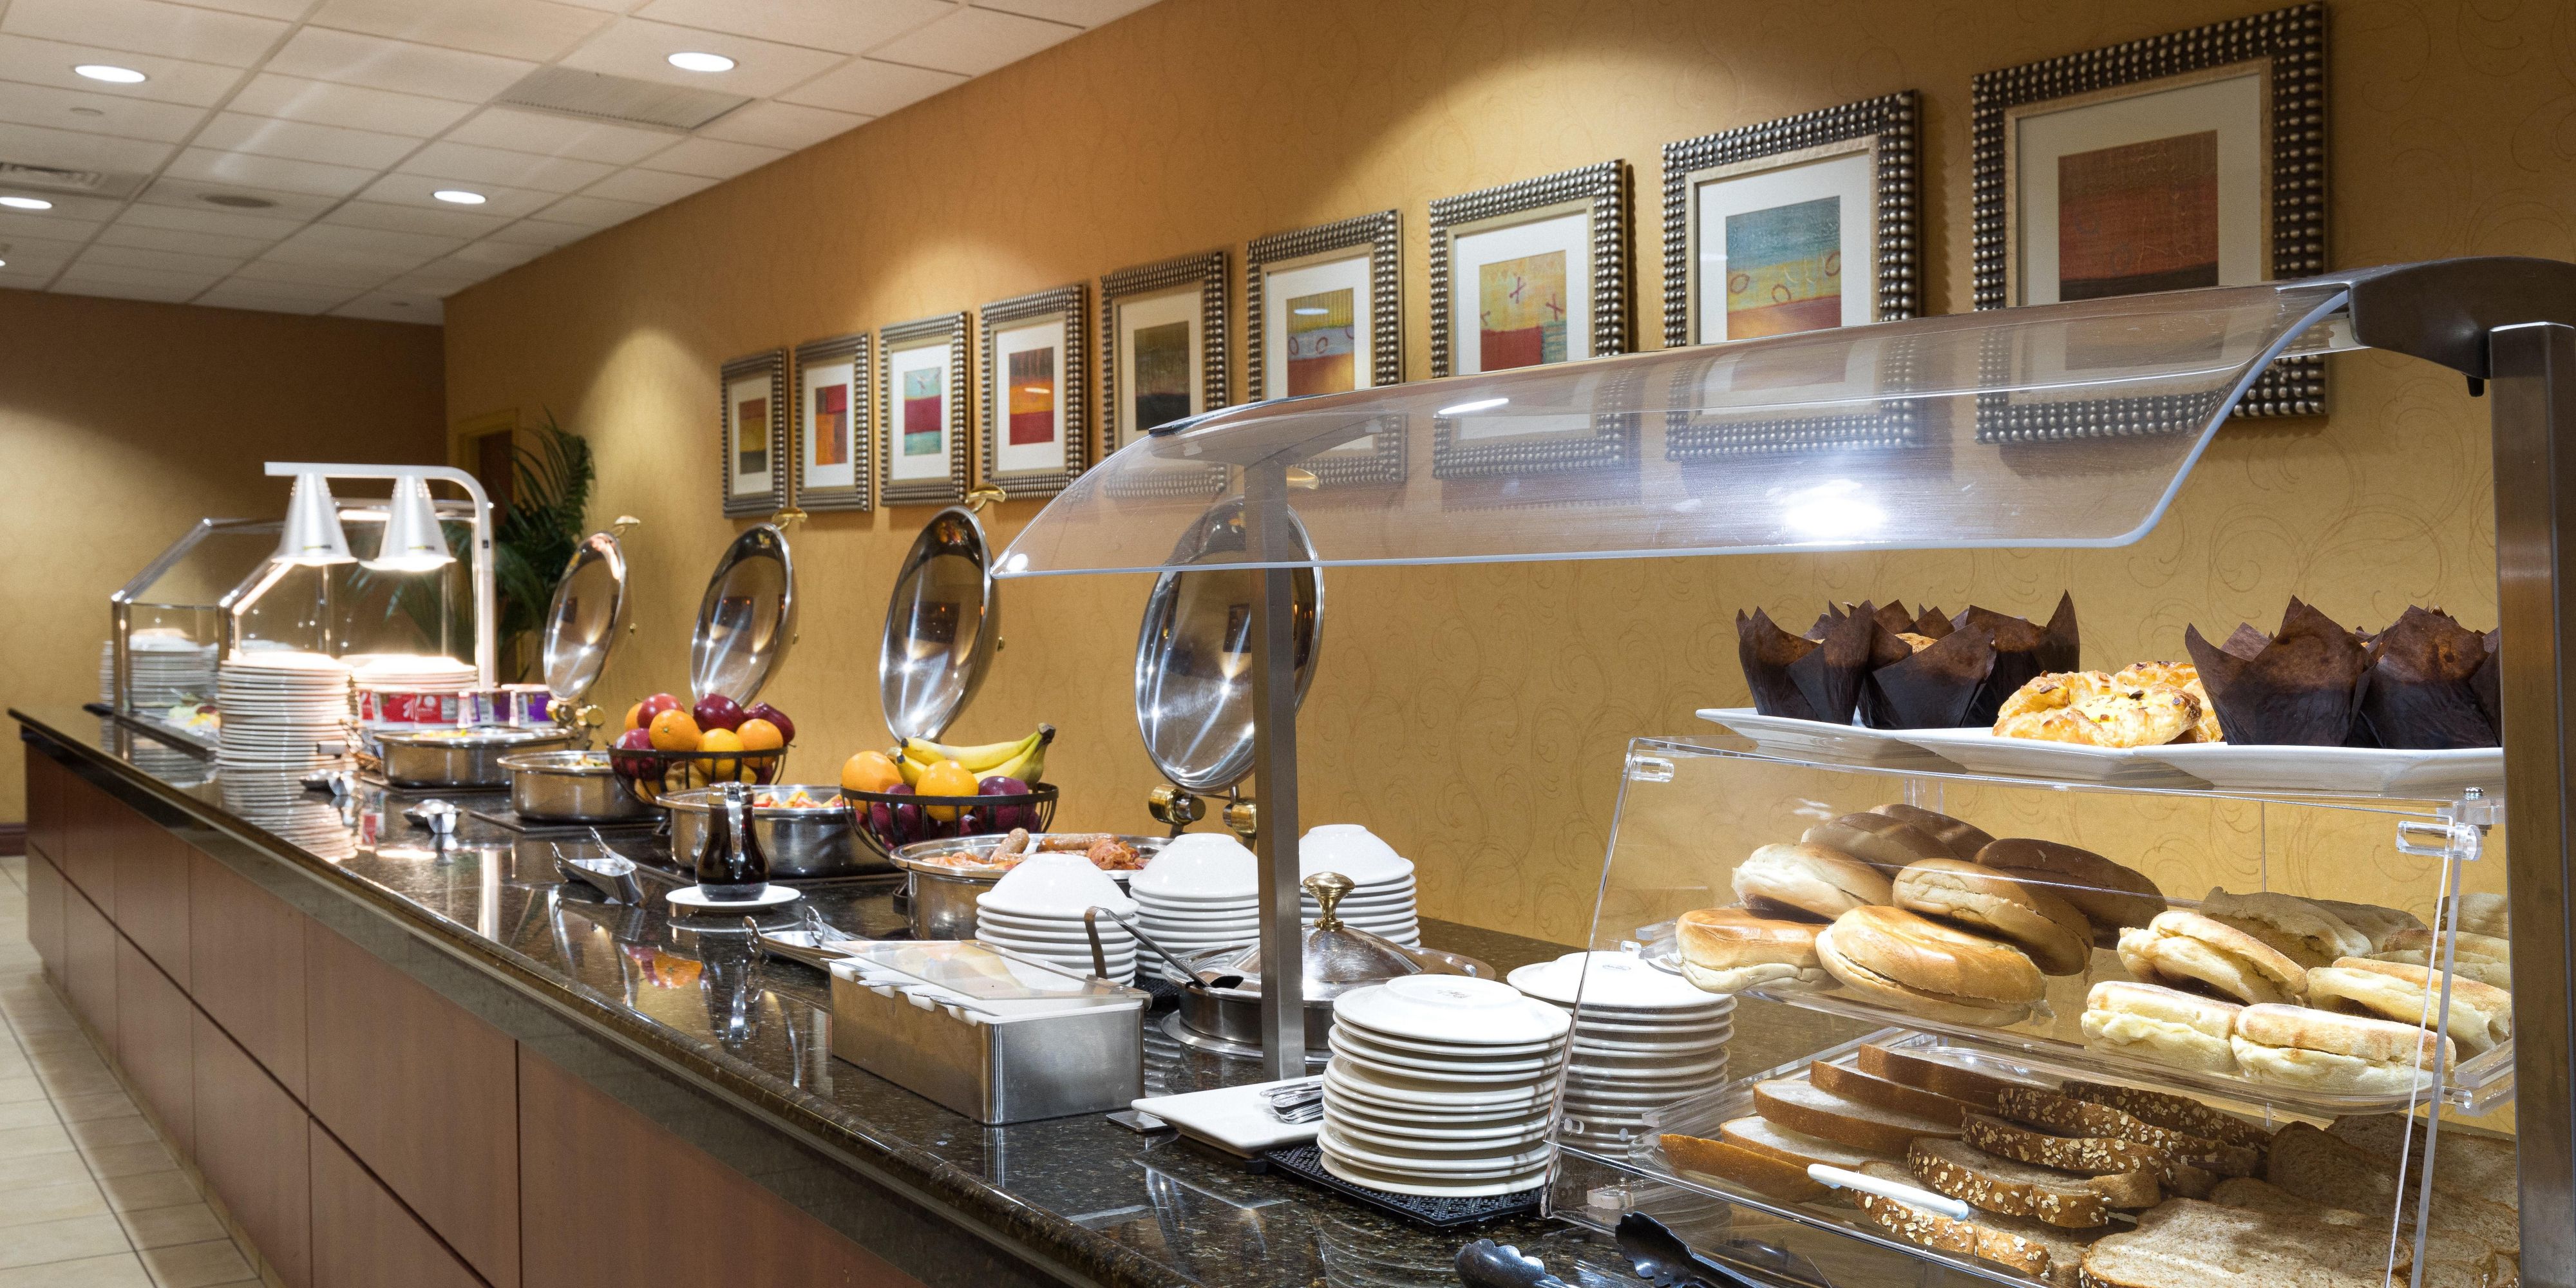 Enjoy a fresh breakfast served daily at our restaurant.